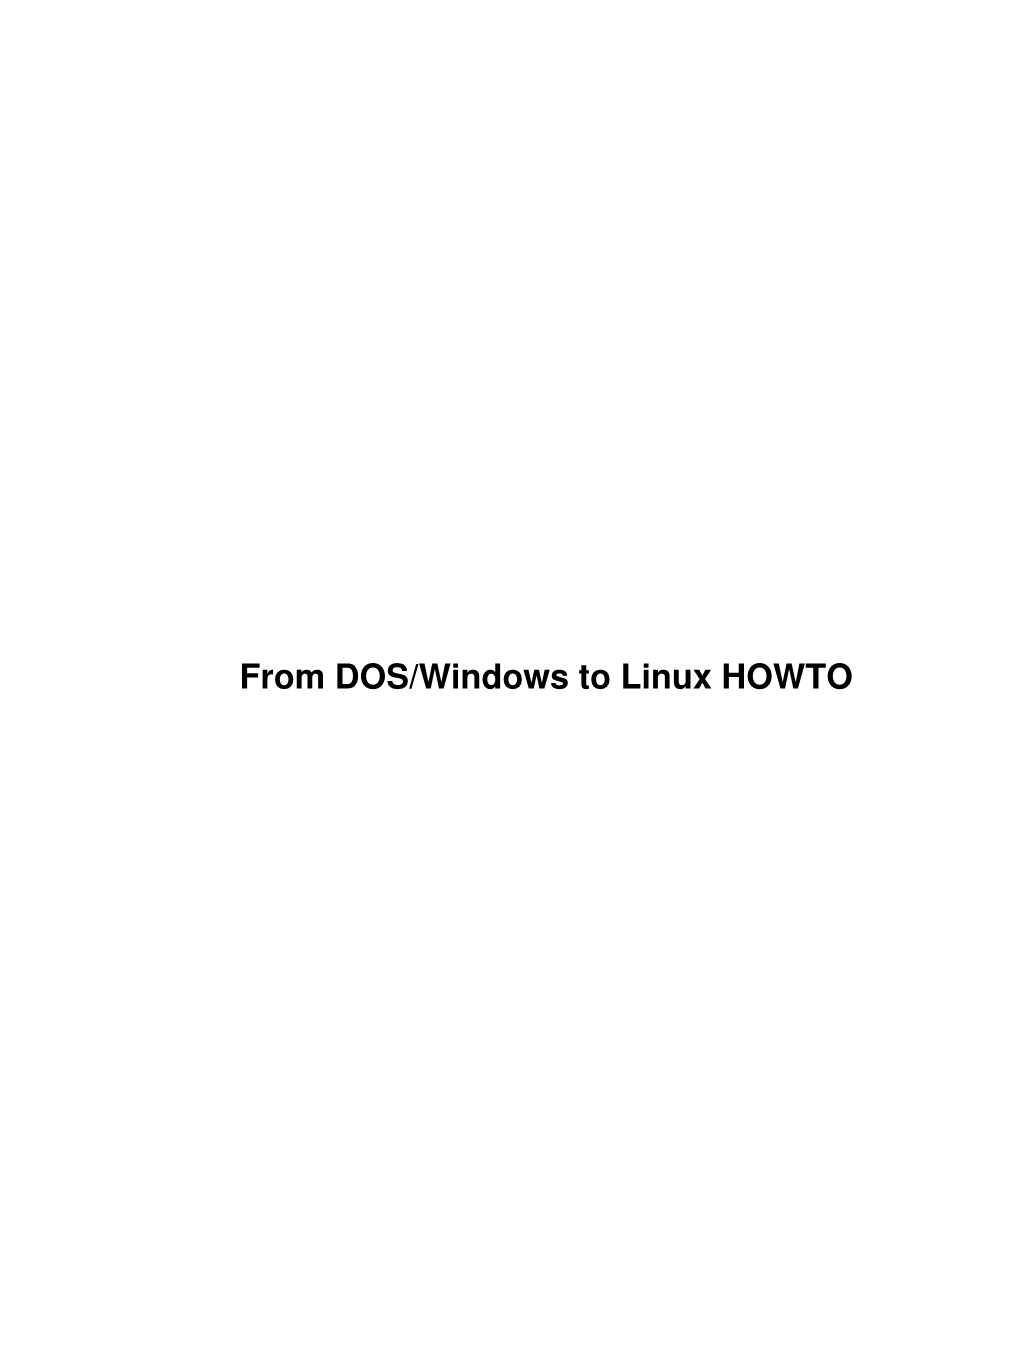 From DOS/Windows to Linux HOWTO from DOS/Windows to Linux HOWTO Table of Contents from DOS/Windows to Linux HOWTO